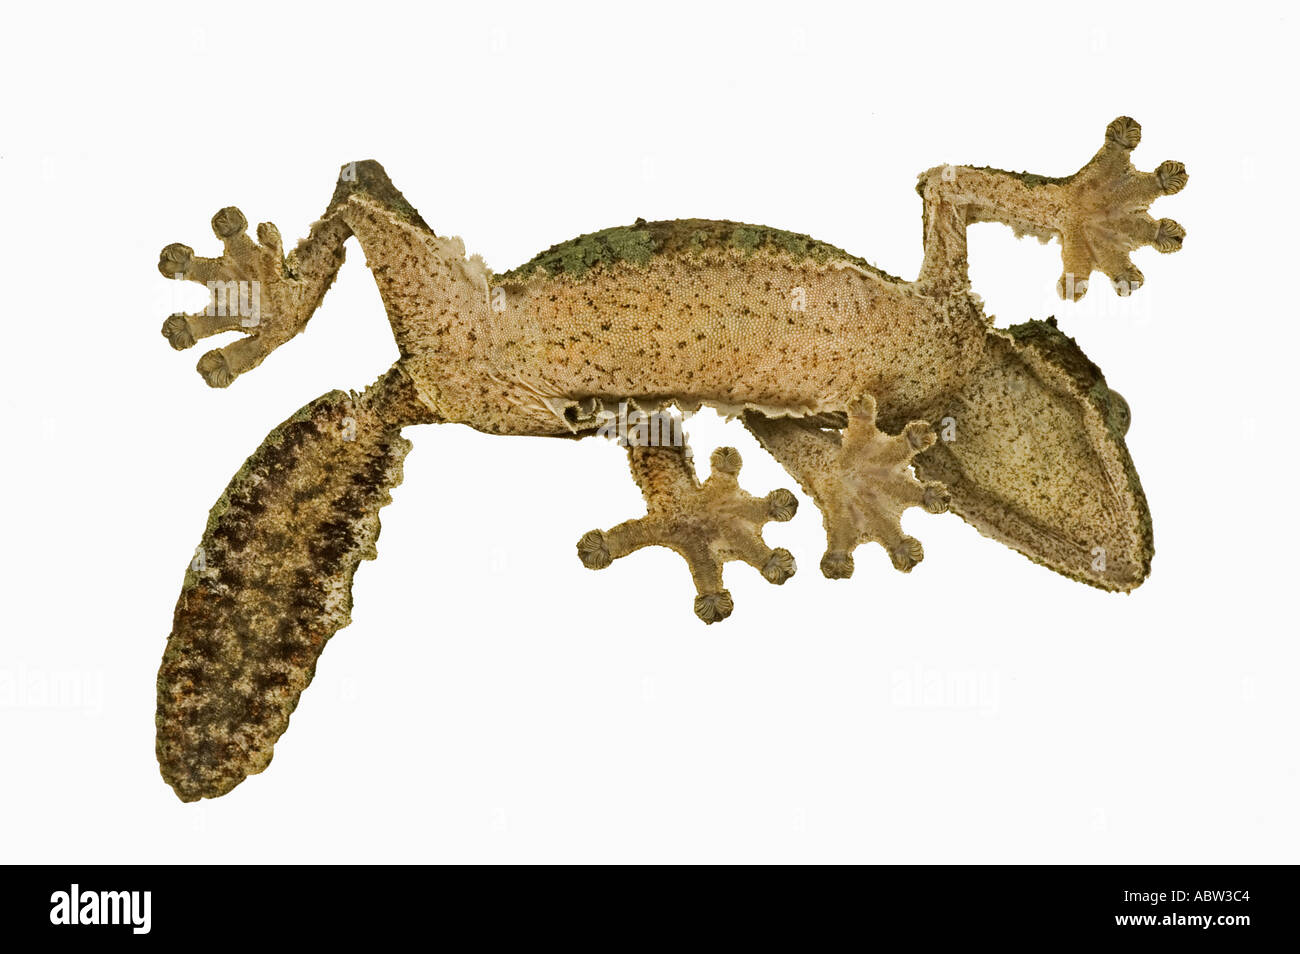 Fringed gecko Uroplatus henkeli View from below showing specially adapted feet Dist Madagascar Stock Photo